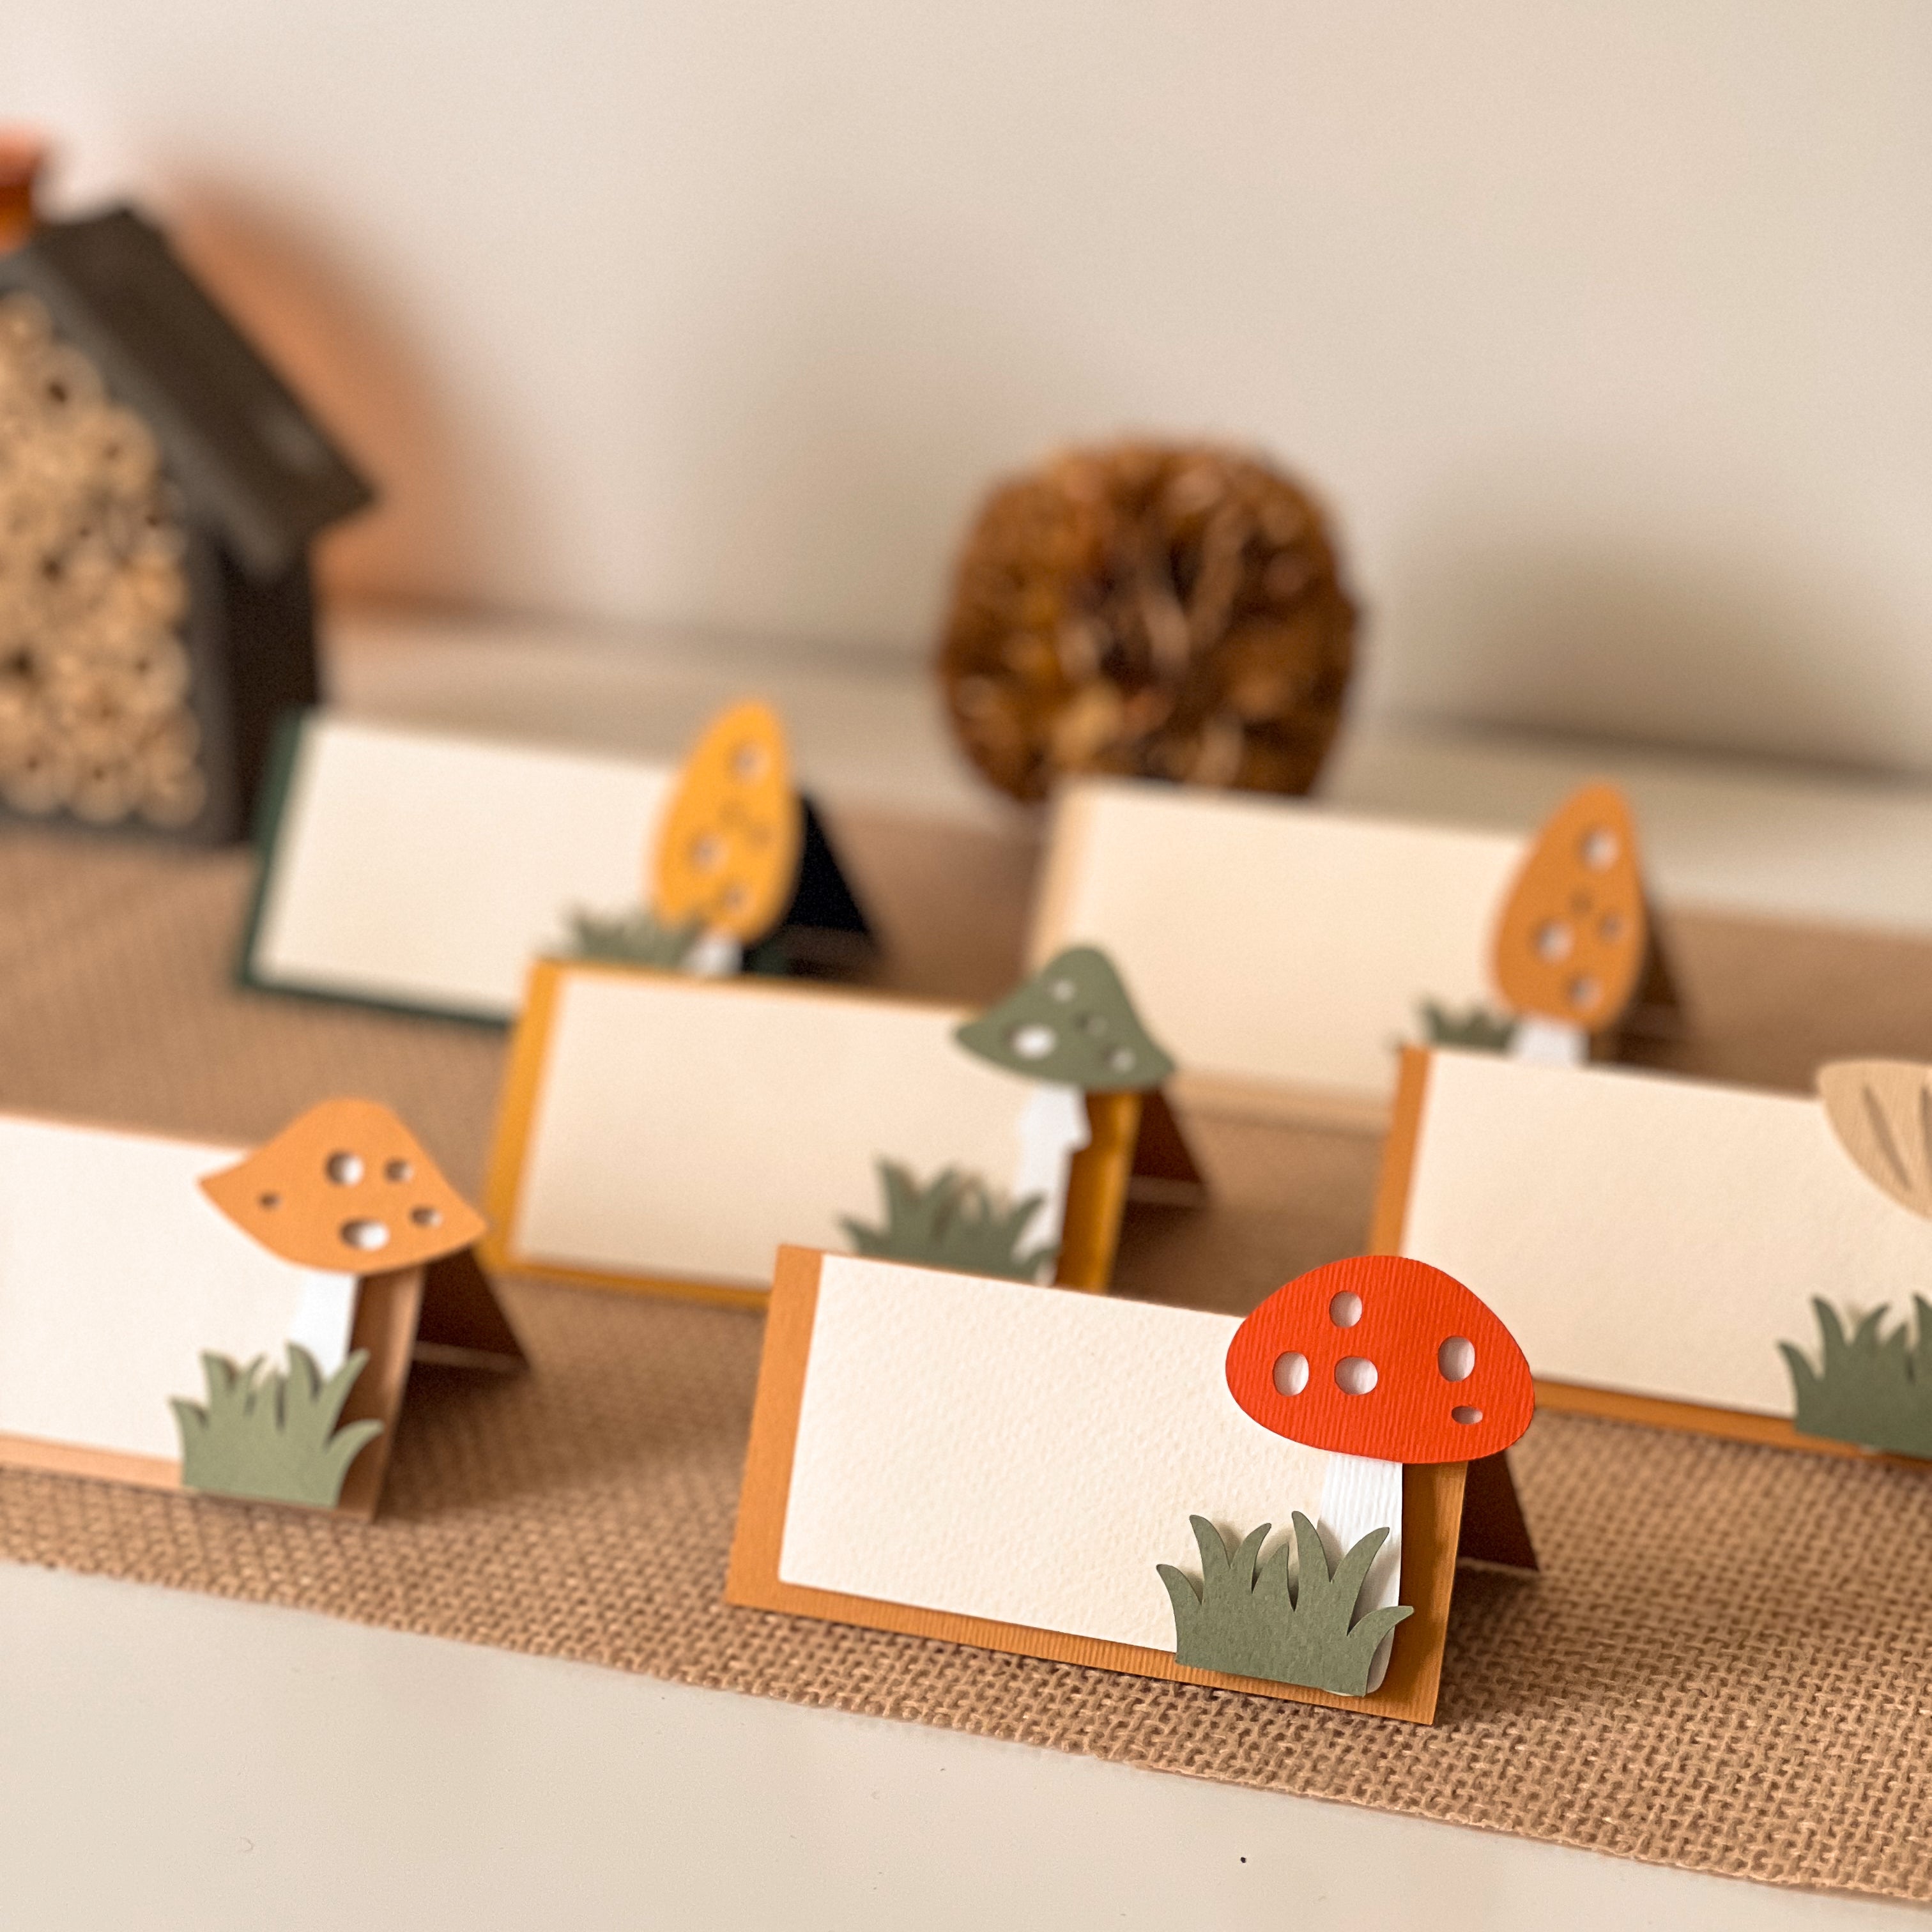 Mushroom Place Cards Mushroom 1st Birthday Decorations A Little Fungi is on the Way party